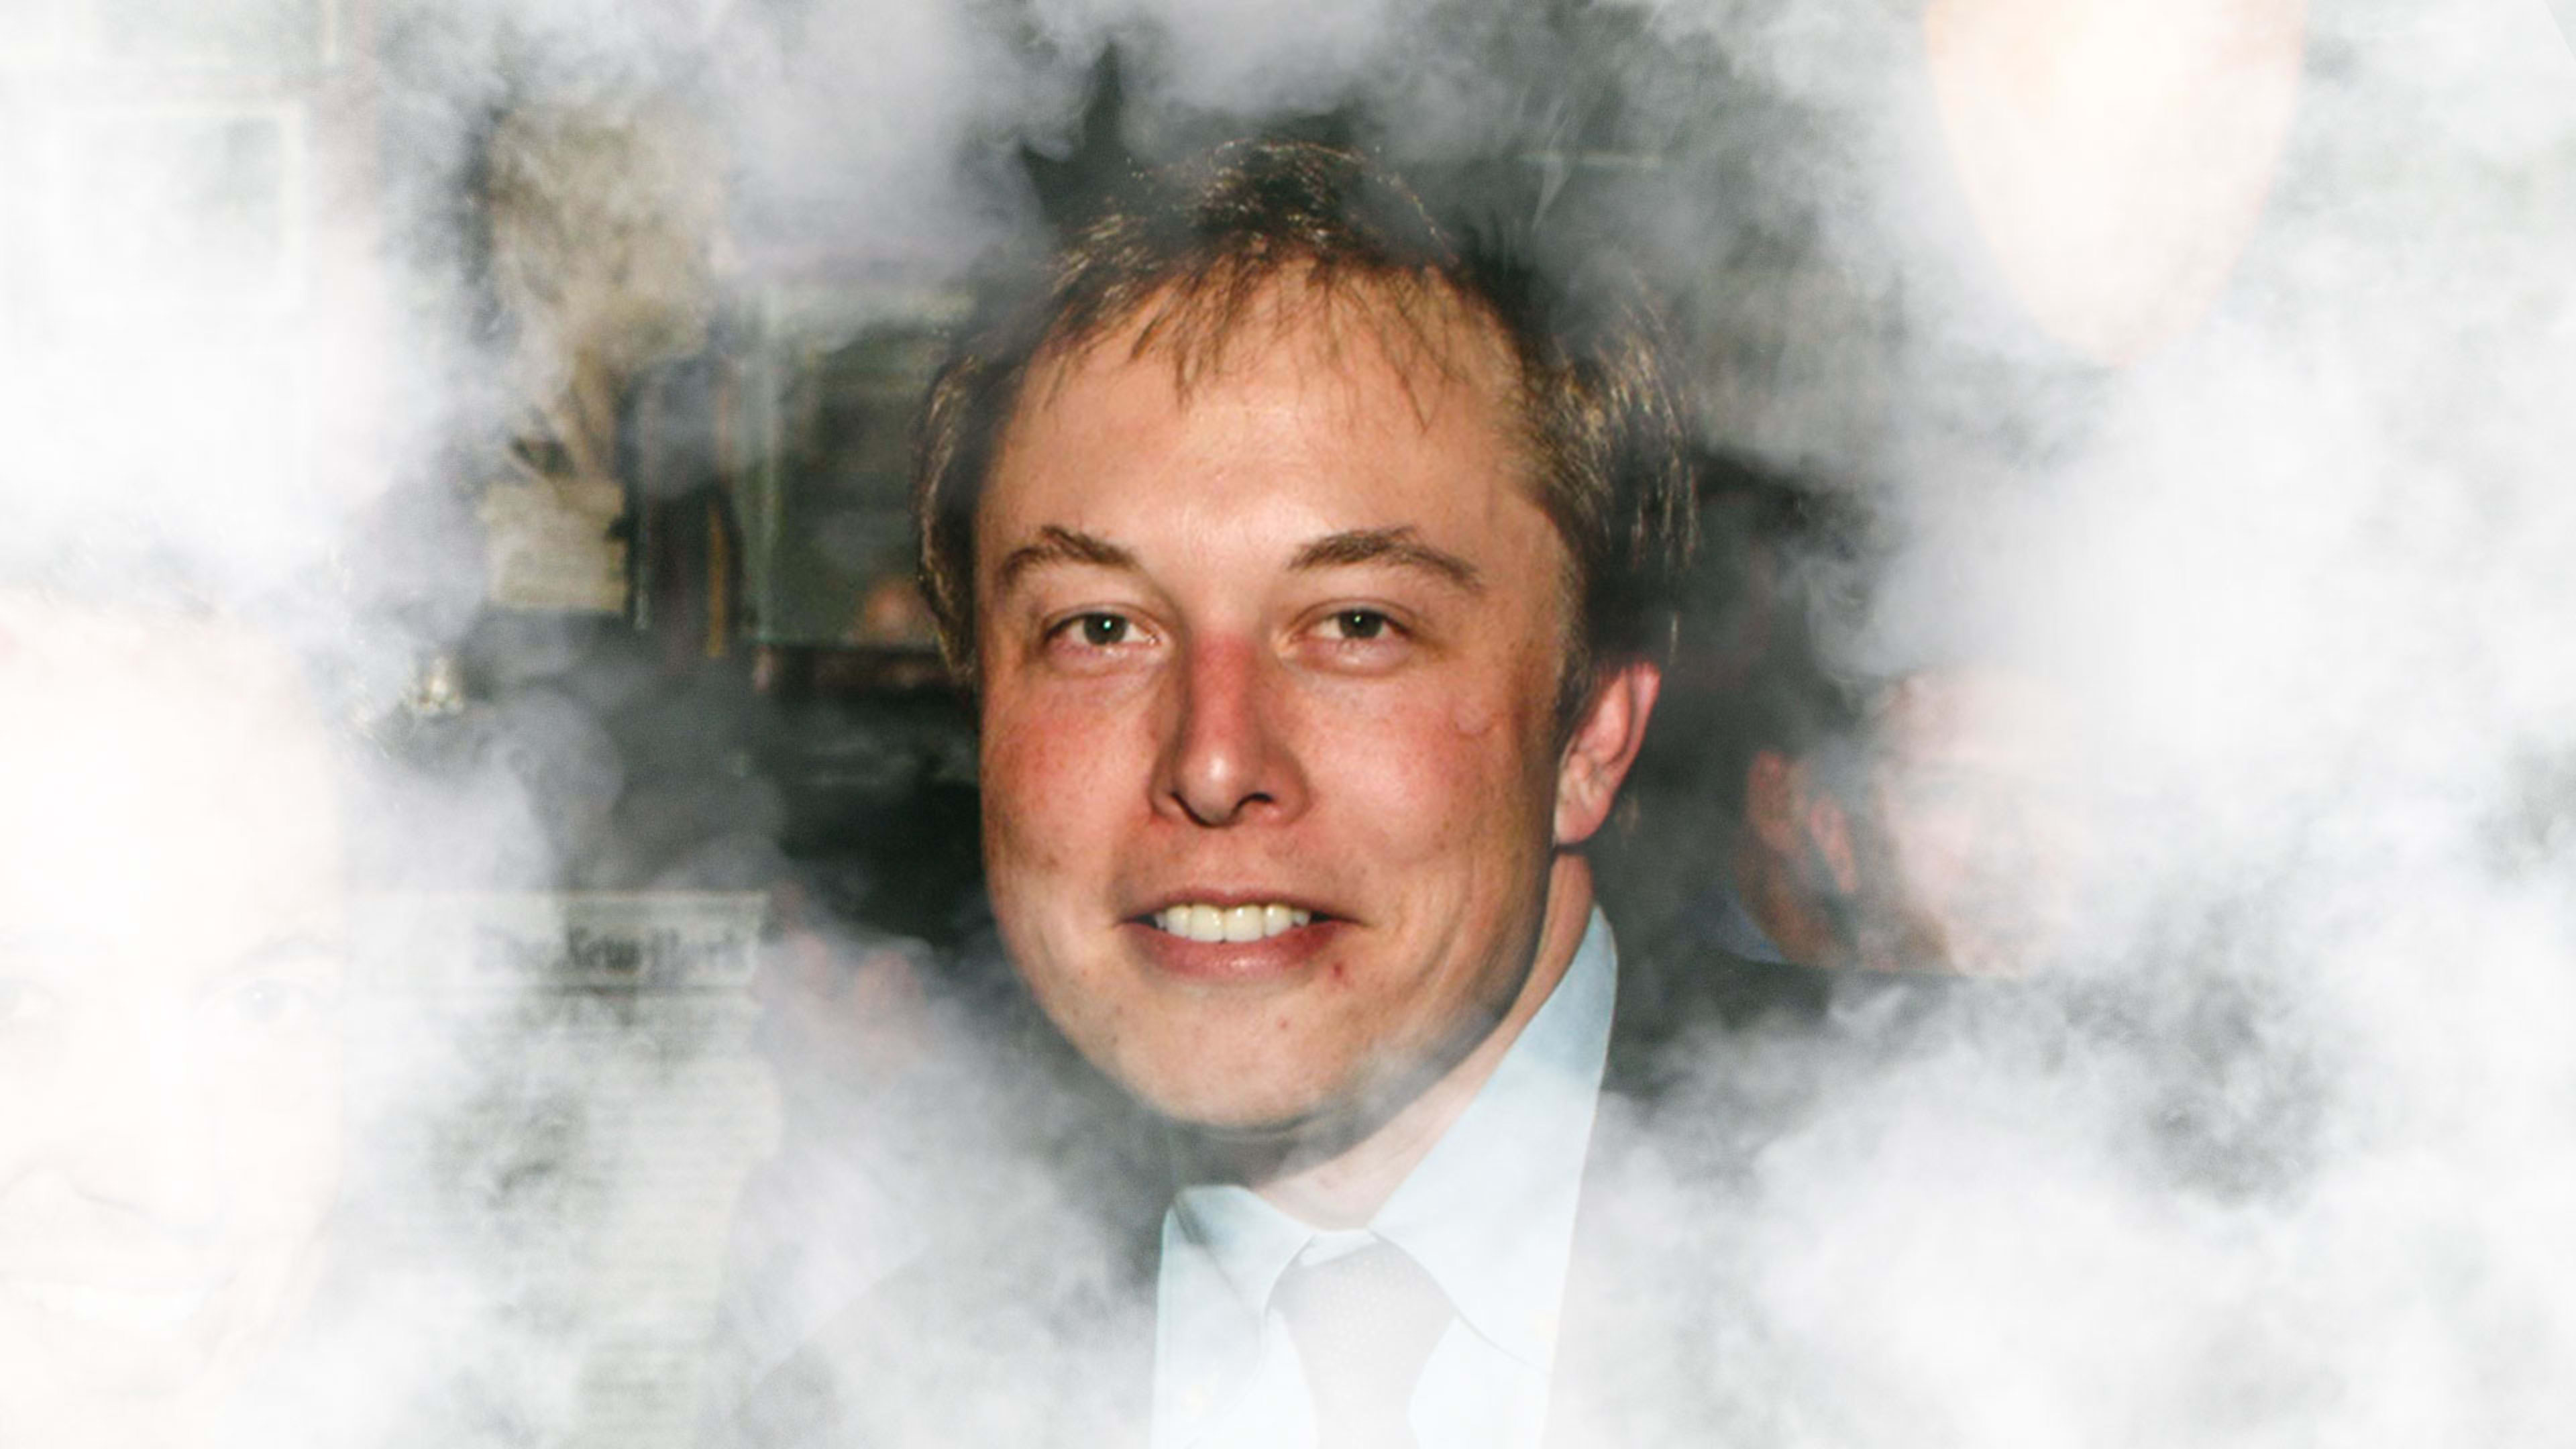 What you can learn about Elon Musk from the movie he helped produce almost 20 years ago